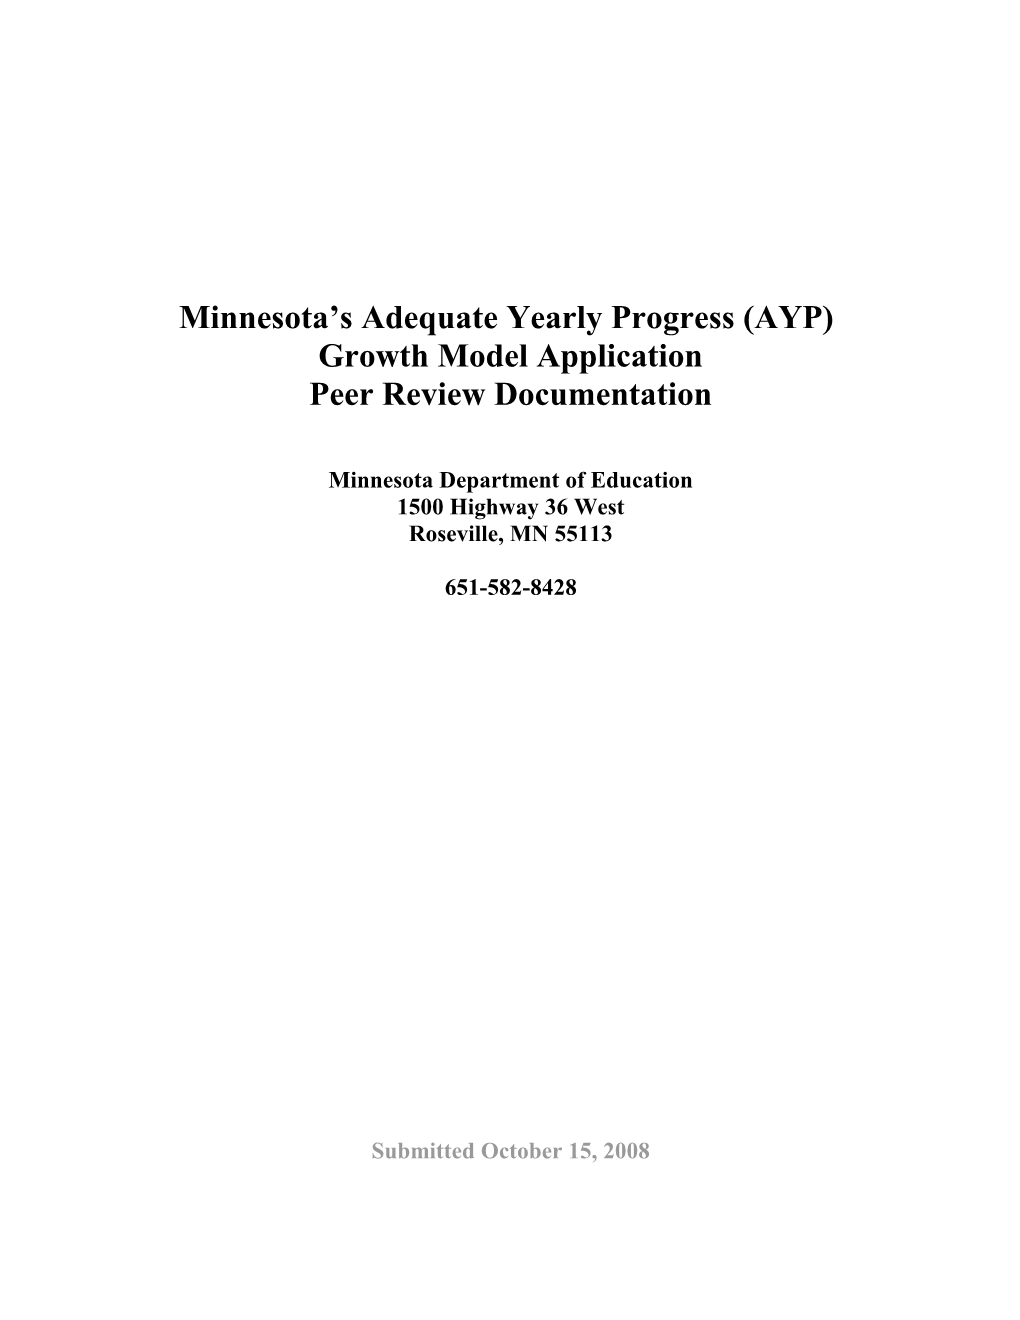 Minnesota Growth Model Proposal Amended January 8, 2009 (MS Word)